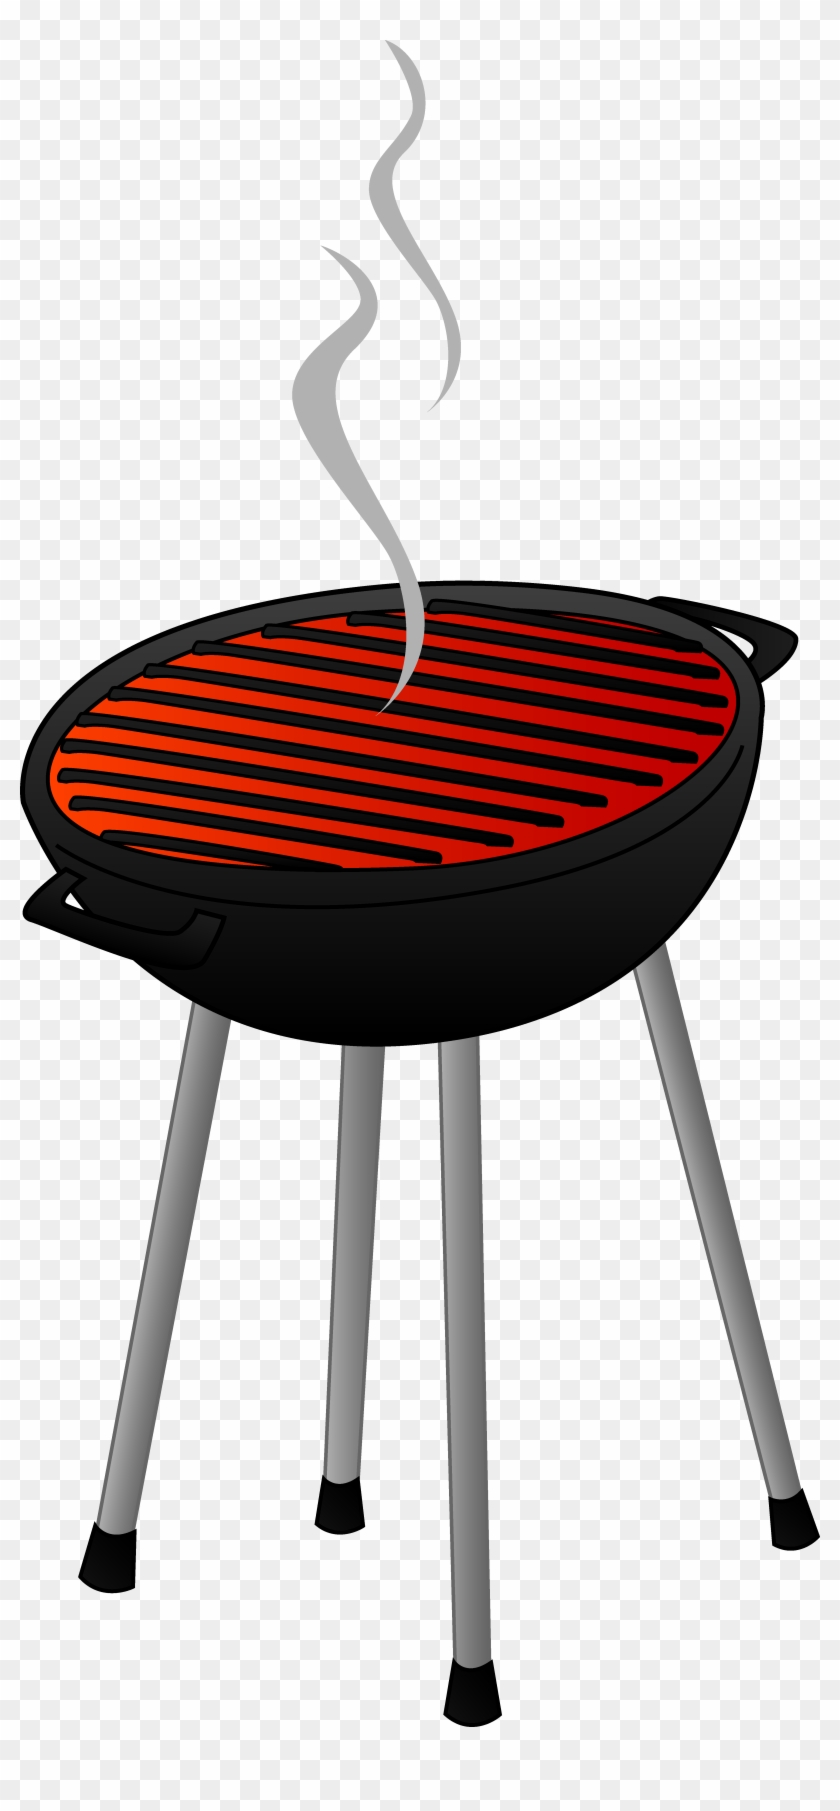 Grill Png Background Image - Grill Clipart Transparent Png